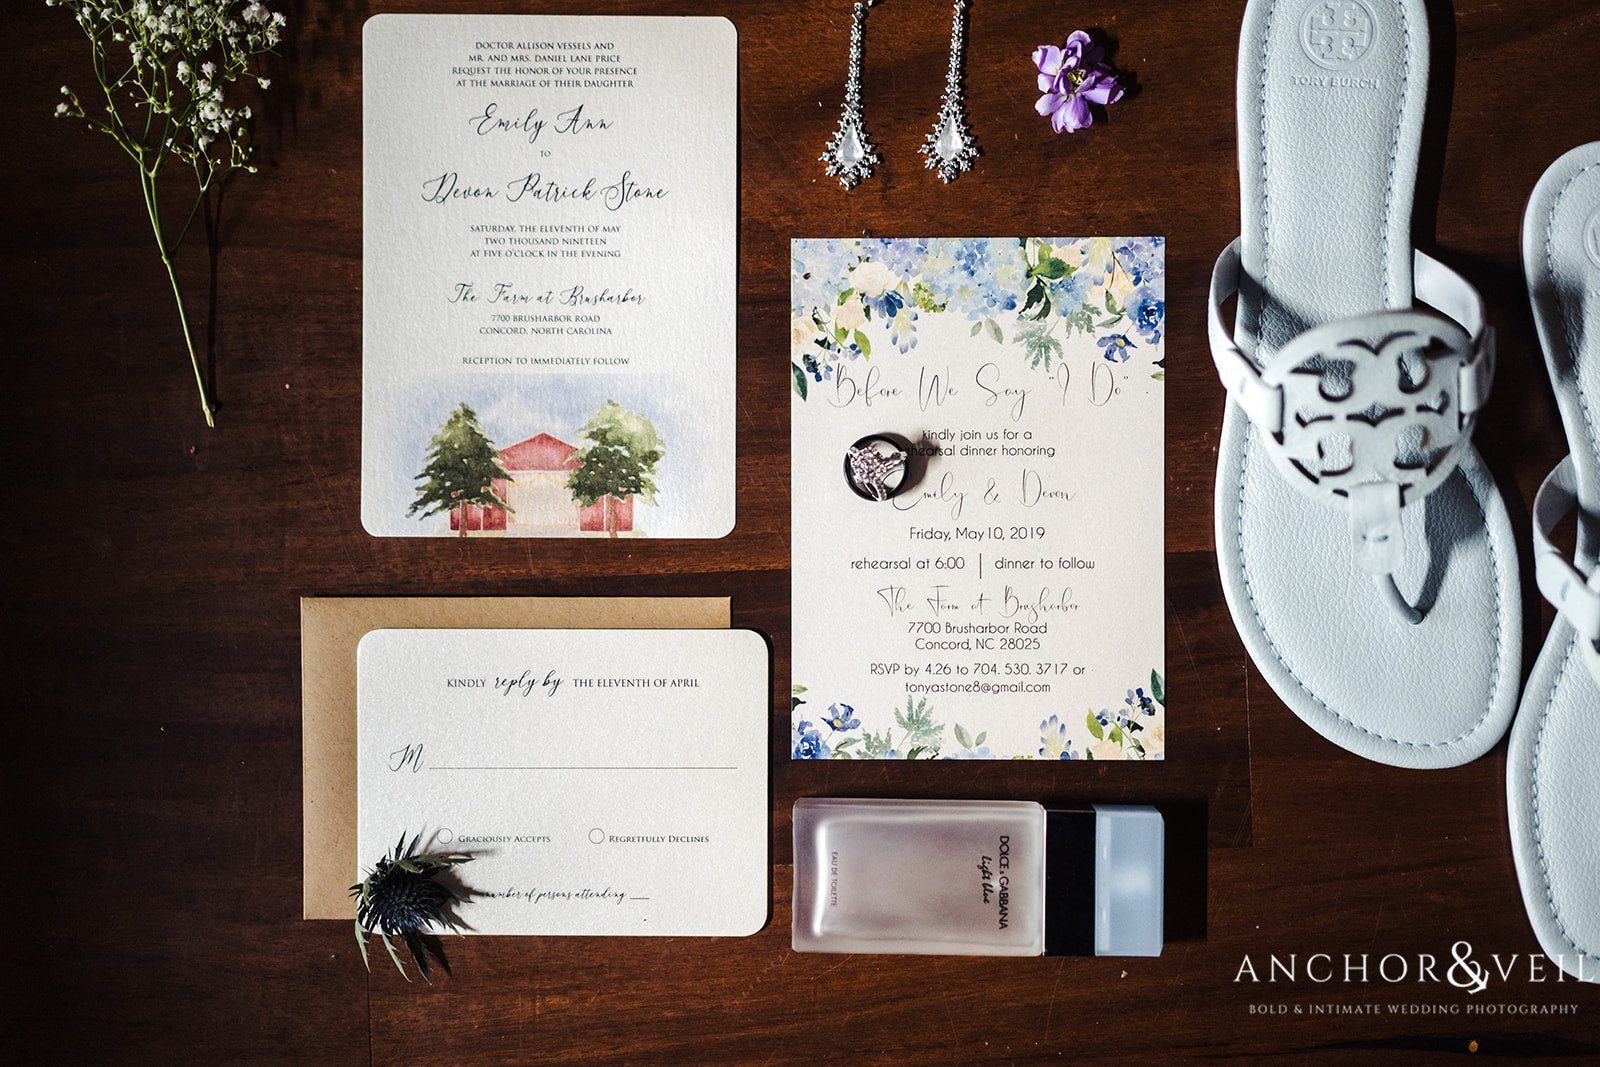 The Brides stationary and ceremony jewelry with shoes at The Farm at Brusharbor Wedding